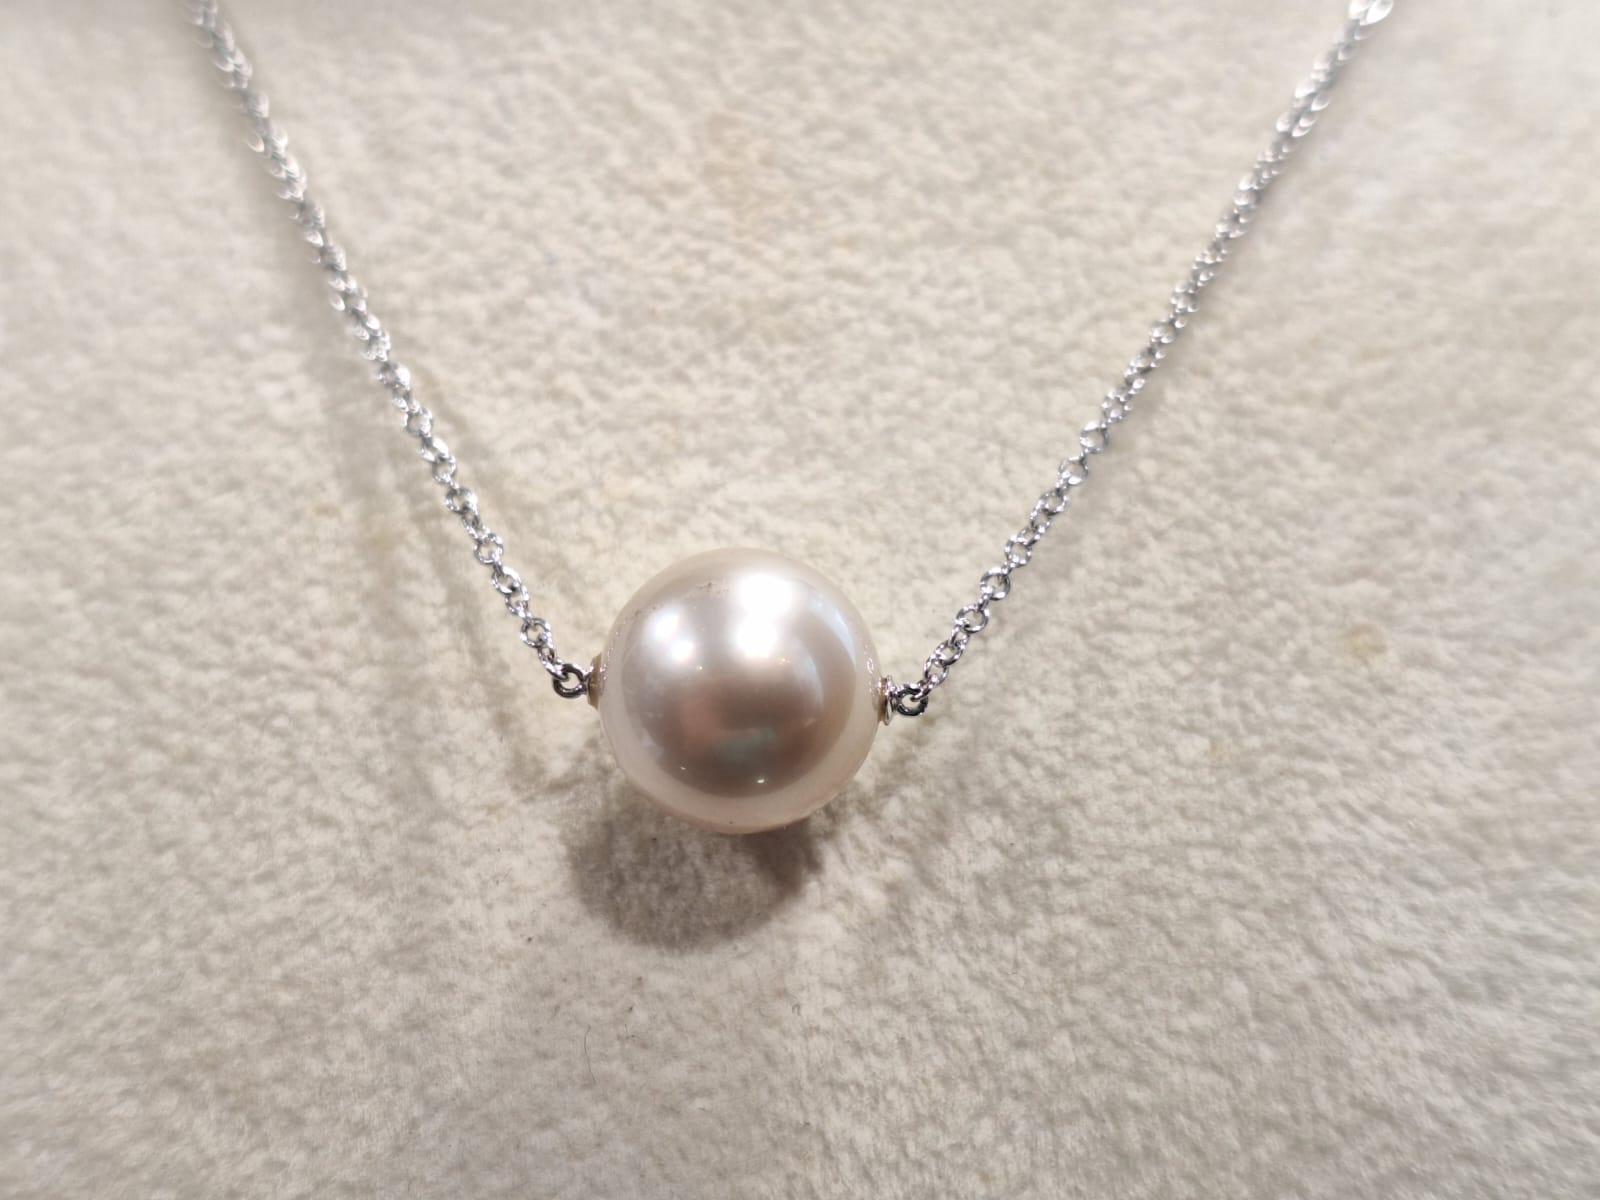 what do white pearls symbolize